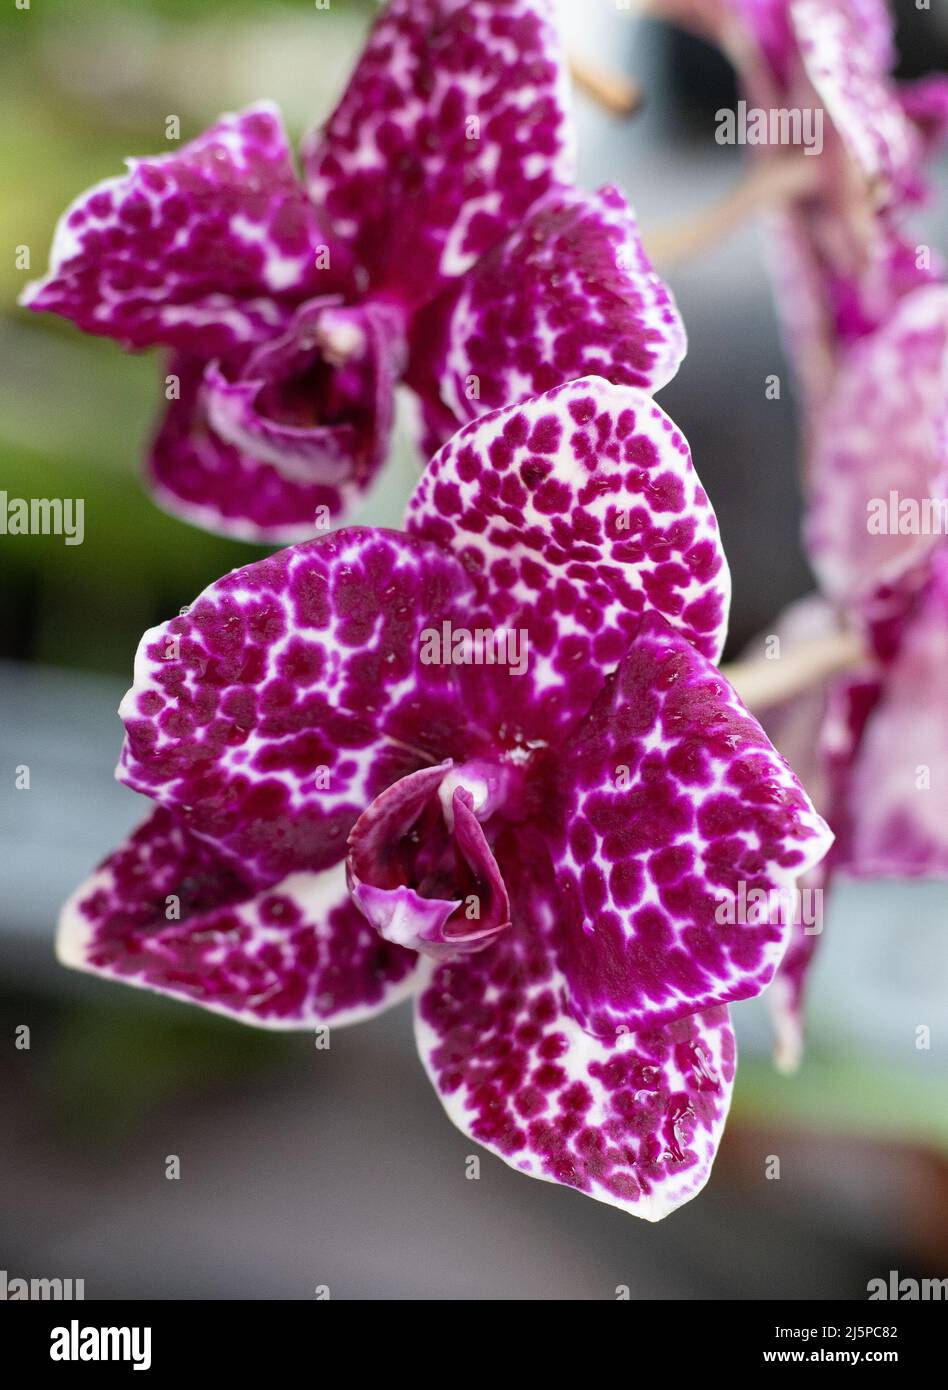 Orchid Phalaenopsis Lioulin Wild Cat. Violet white buds dotted and speckled. Burgundy pink flower. Orchids close-up. Rare variety. Stock Photo